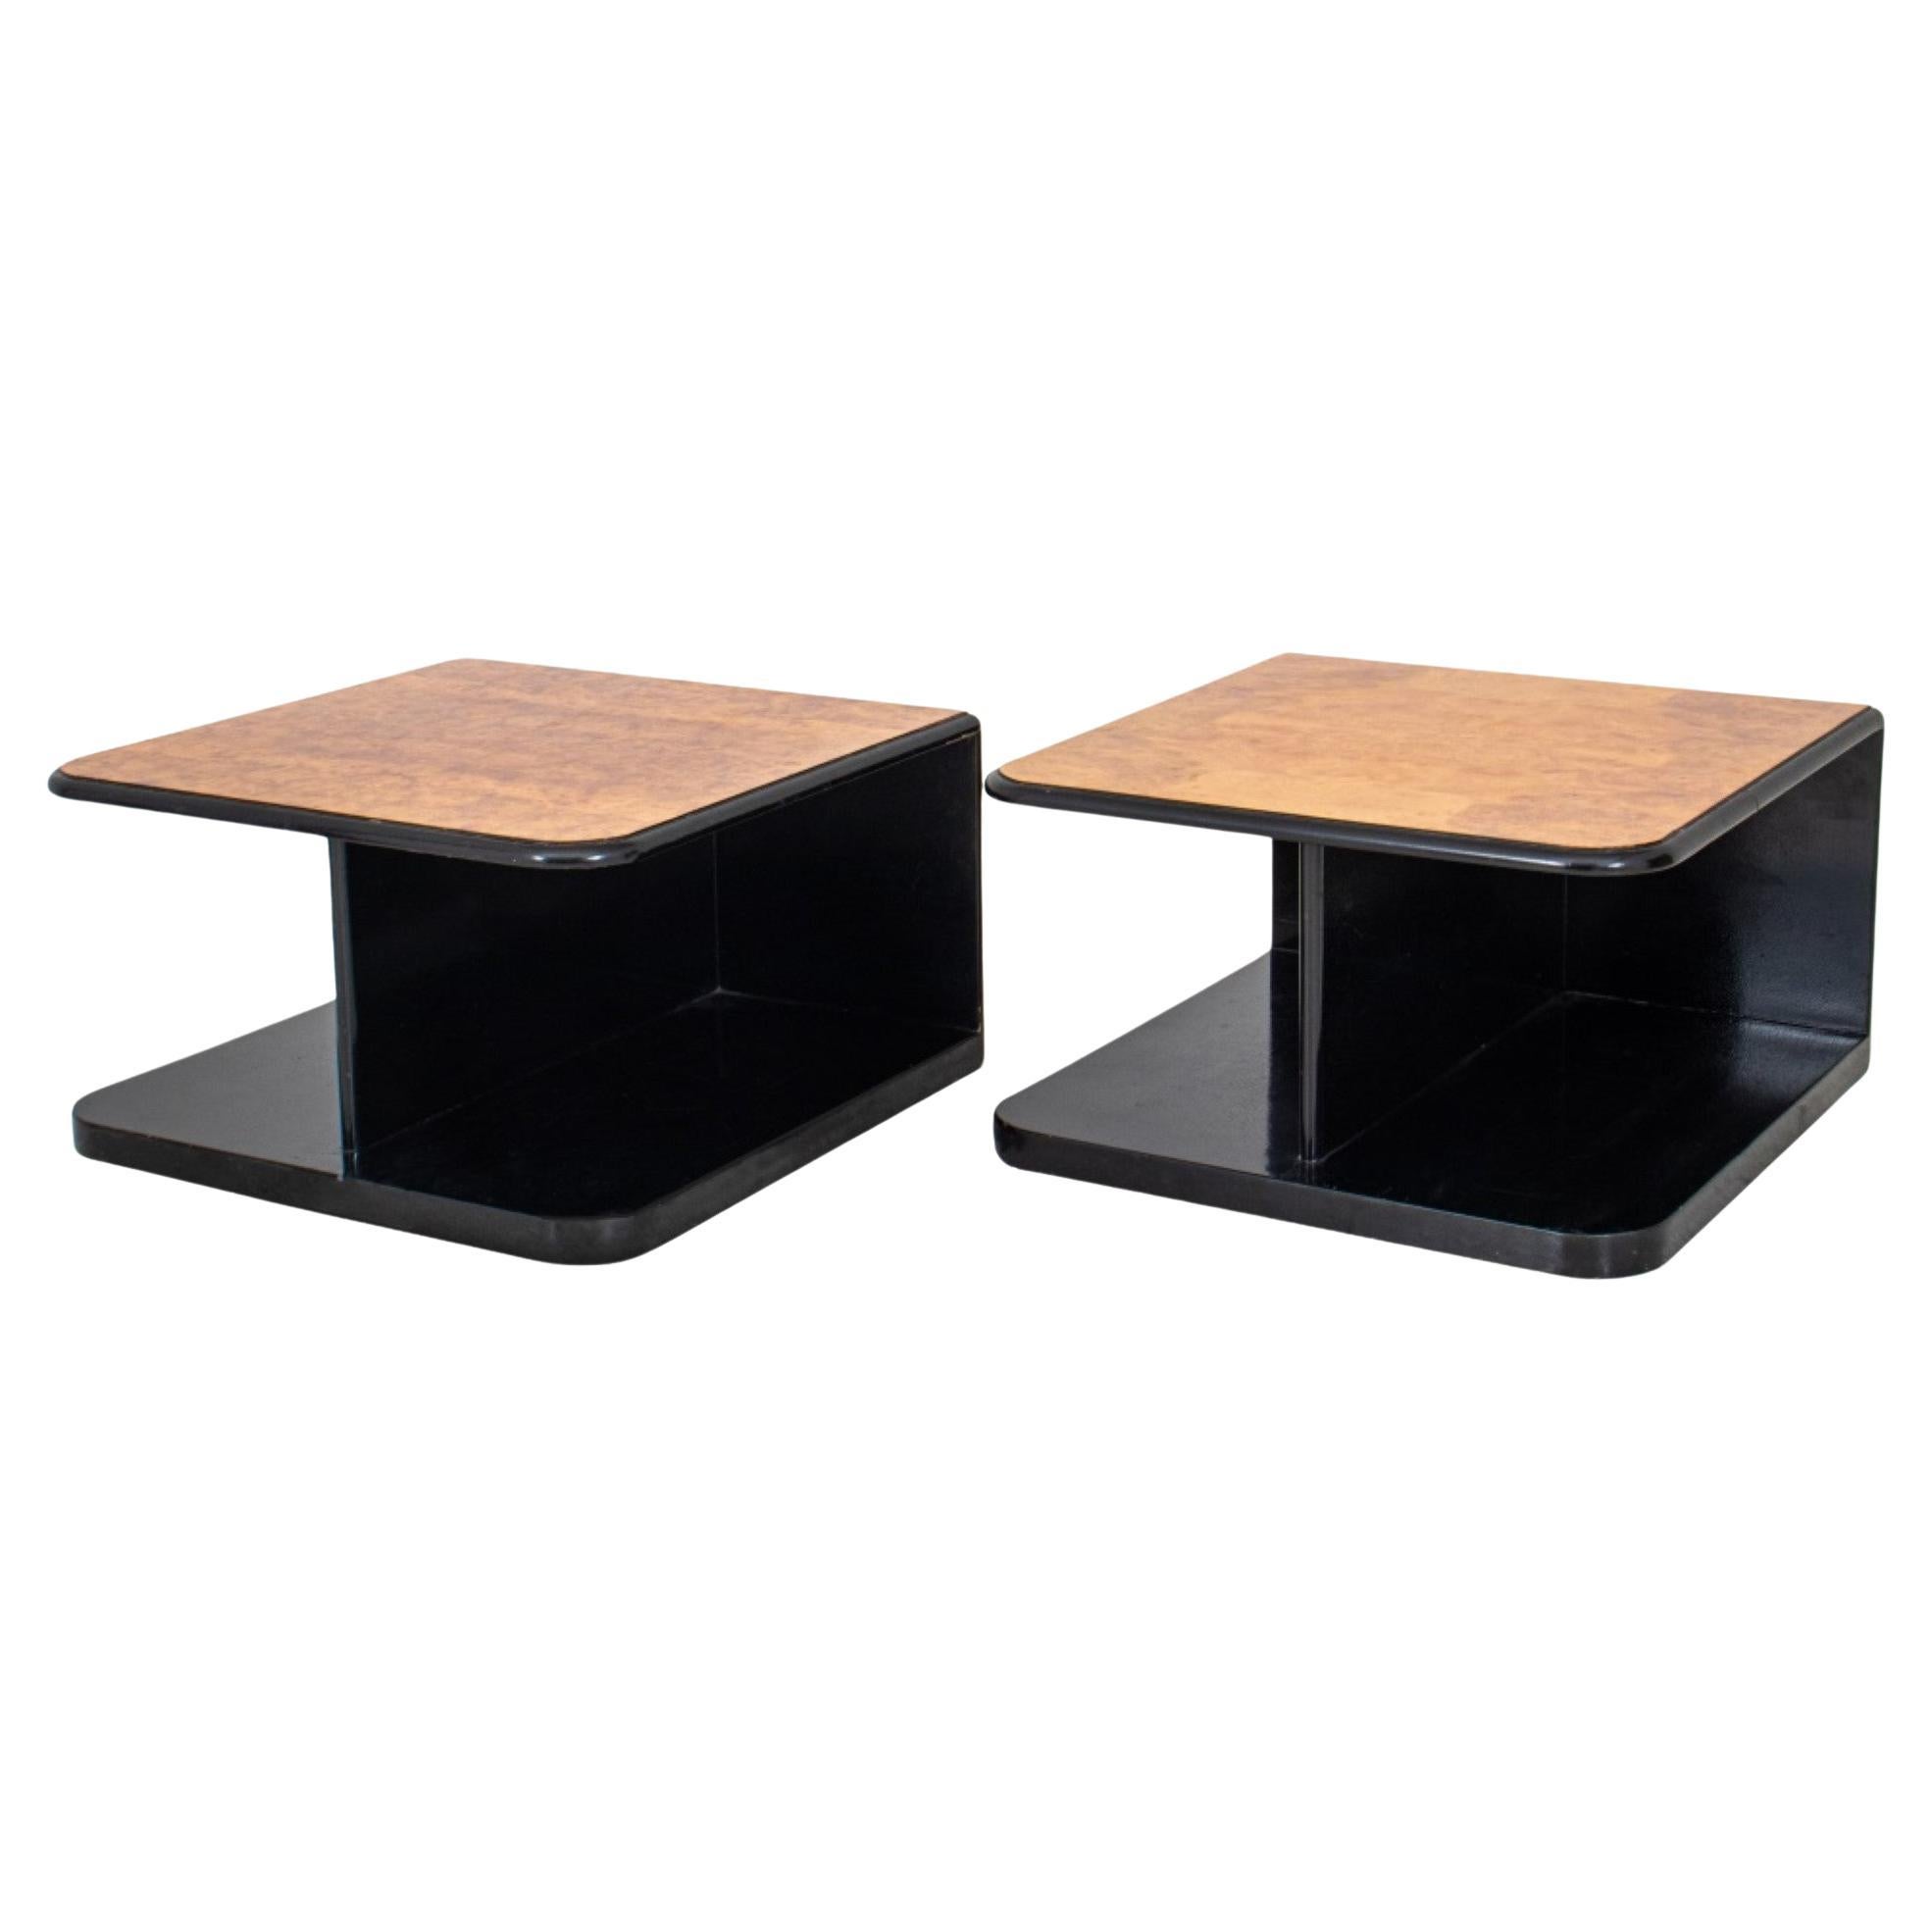 Table basse en loupe d'orme The Moderns Table d'appoint, paire